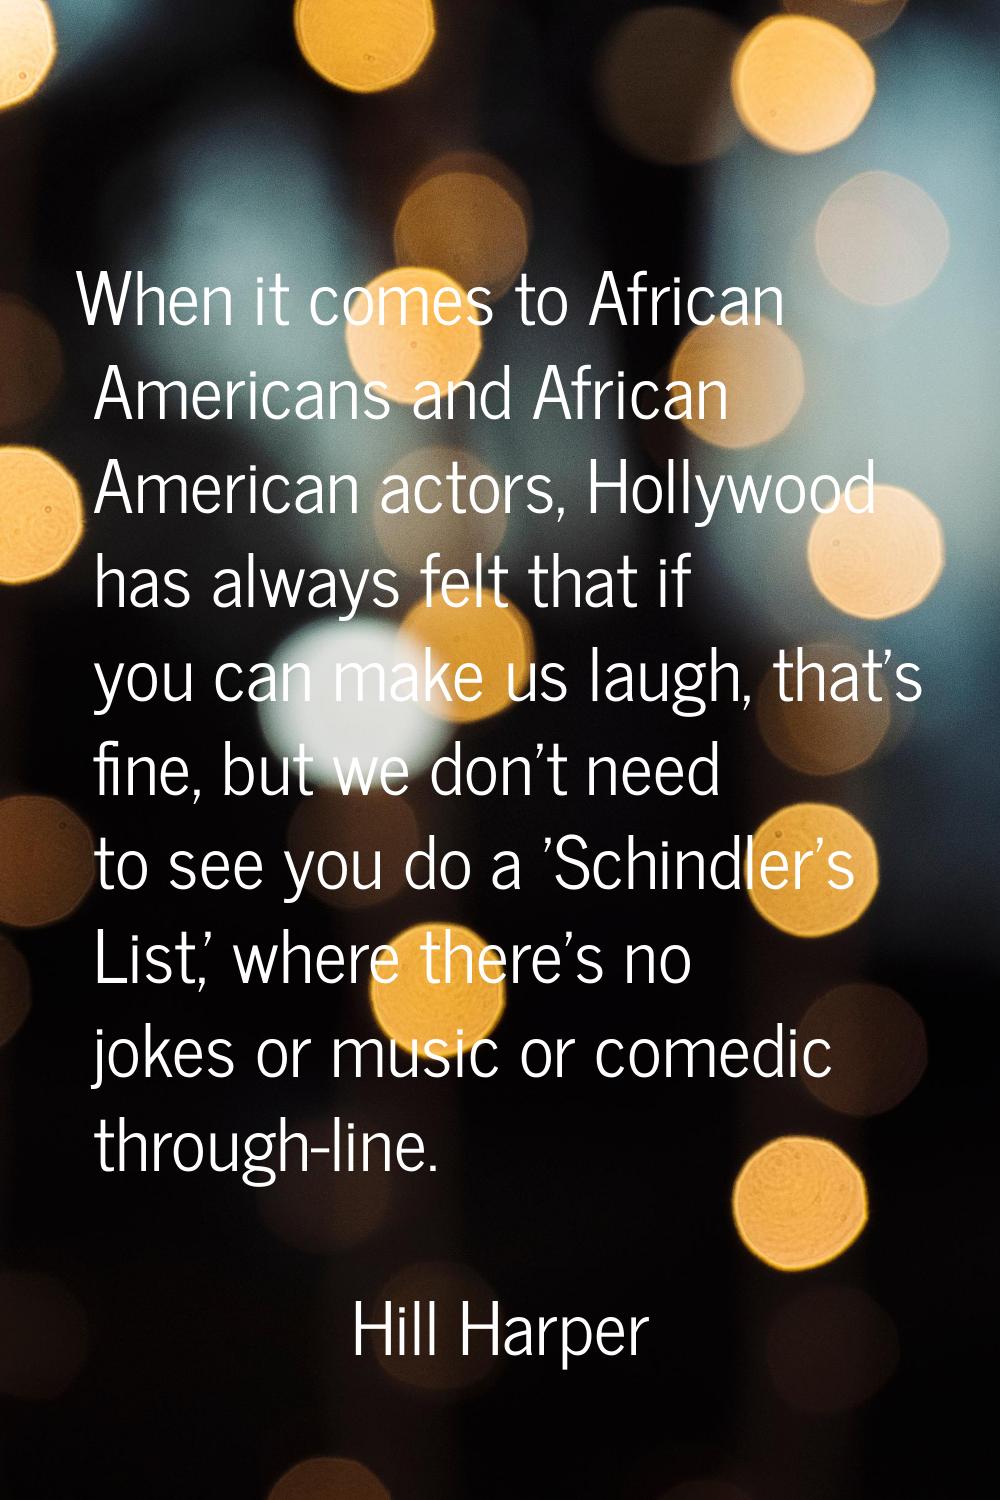 When it comes to African Americans and African American actors, Hollywood has always felt that if y